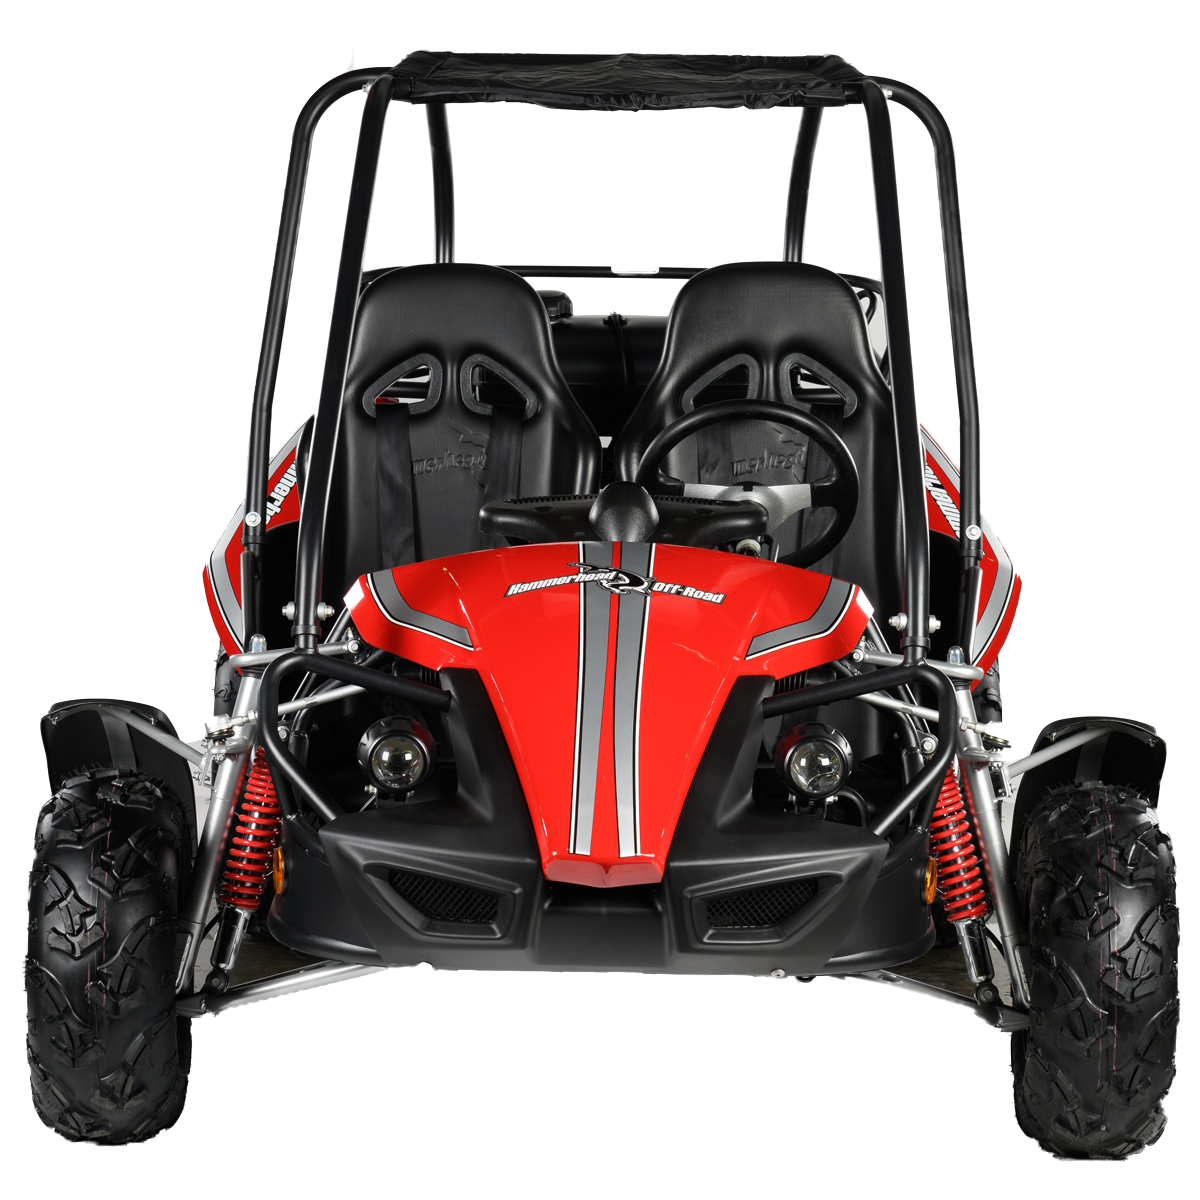 hammerhead-gts150-buggy-with-usa-specs-red-front-view